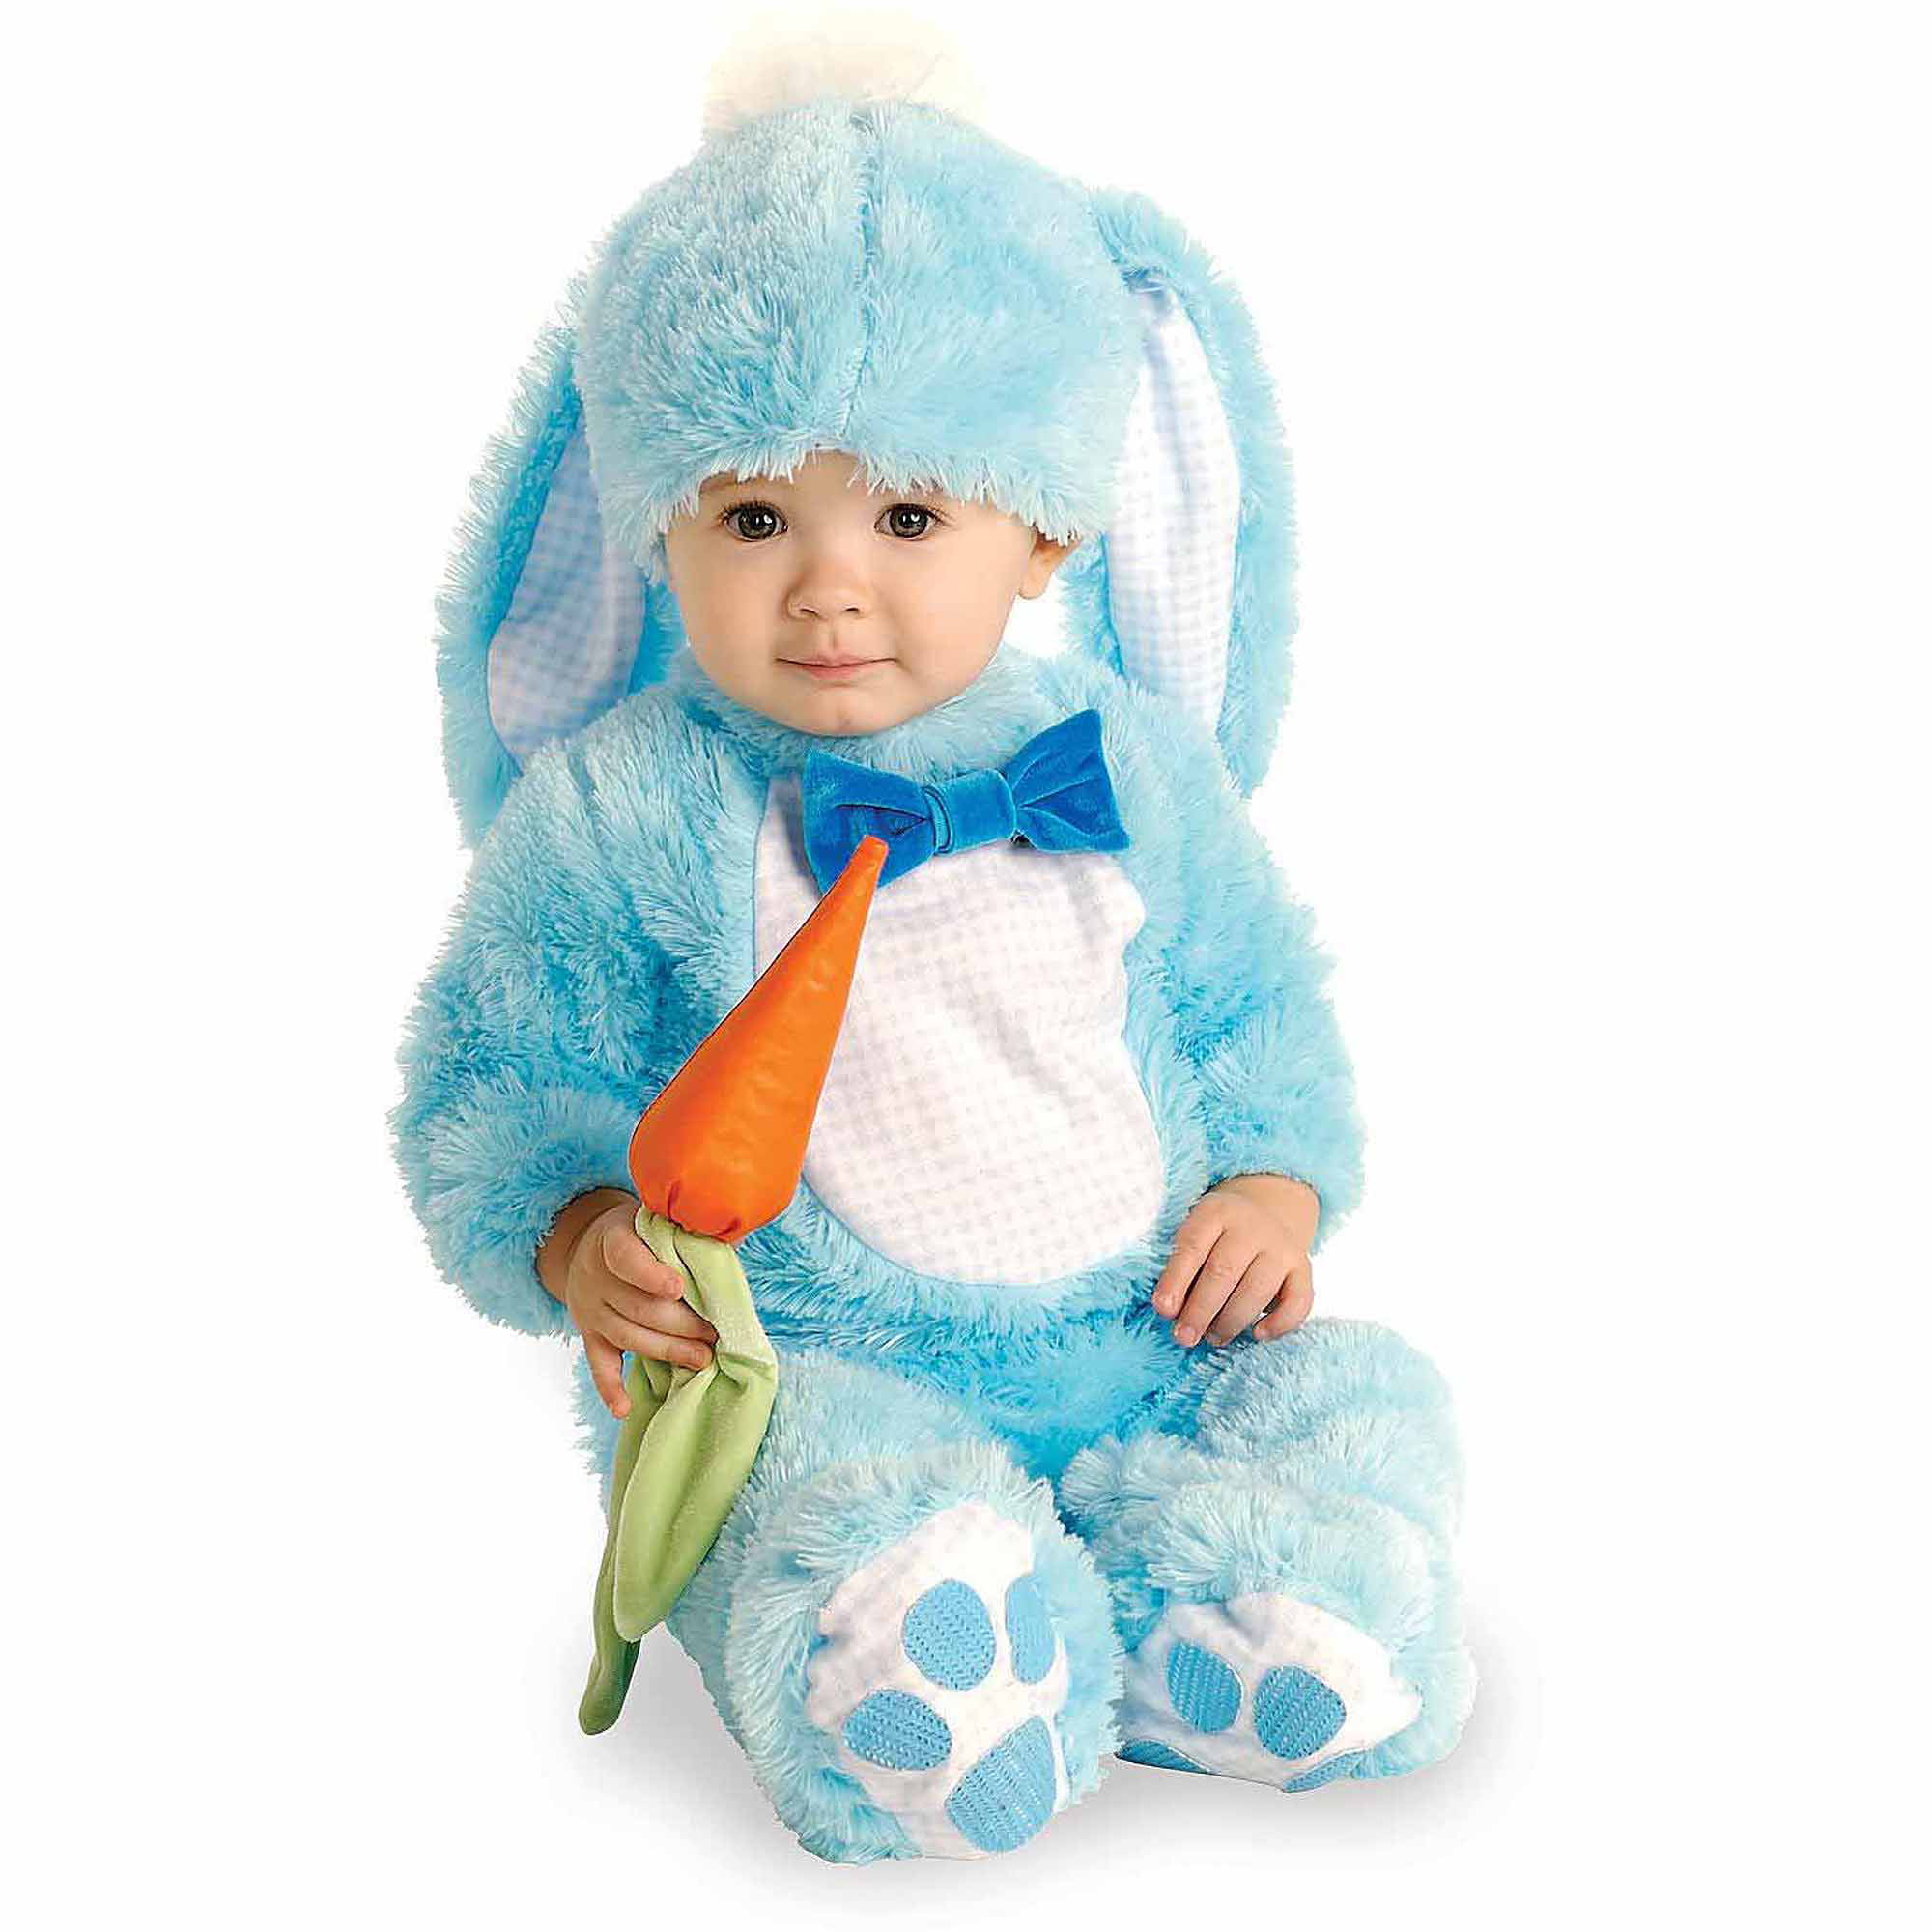 baby in bunny outfit